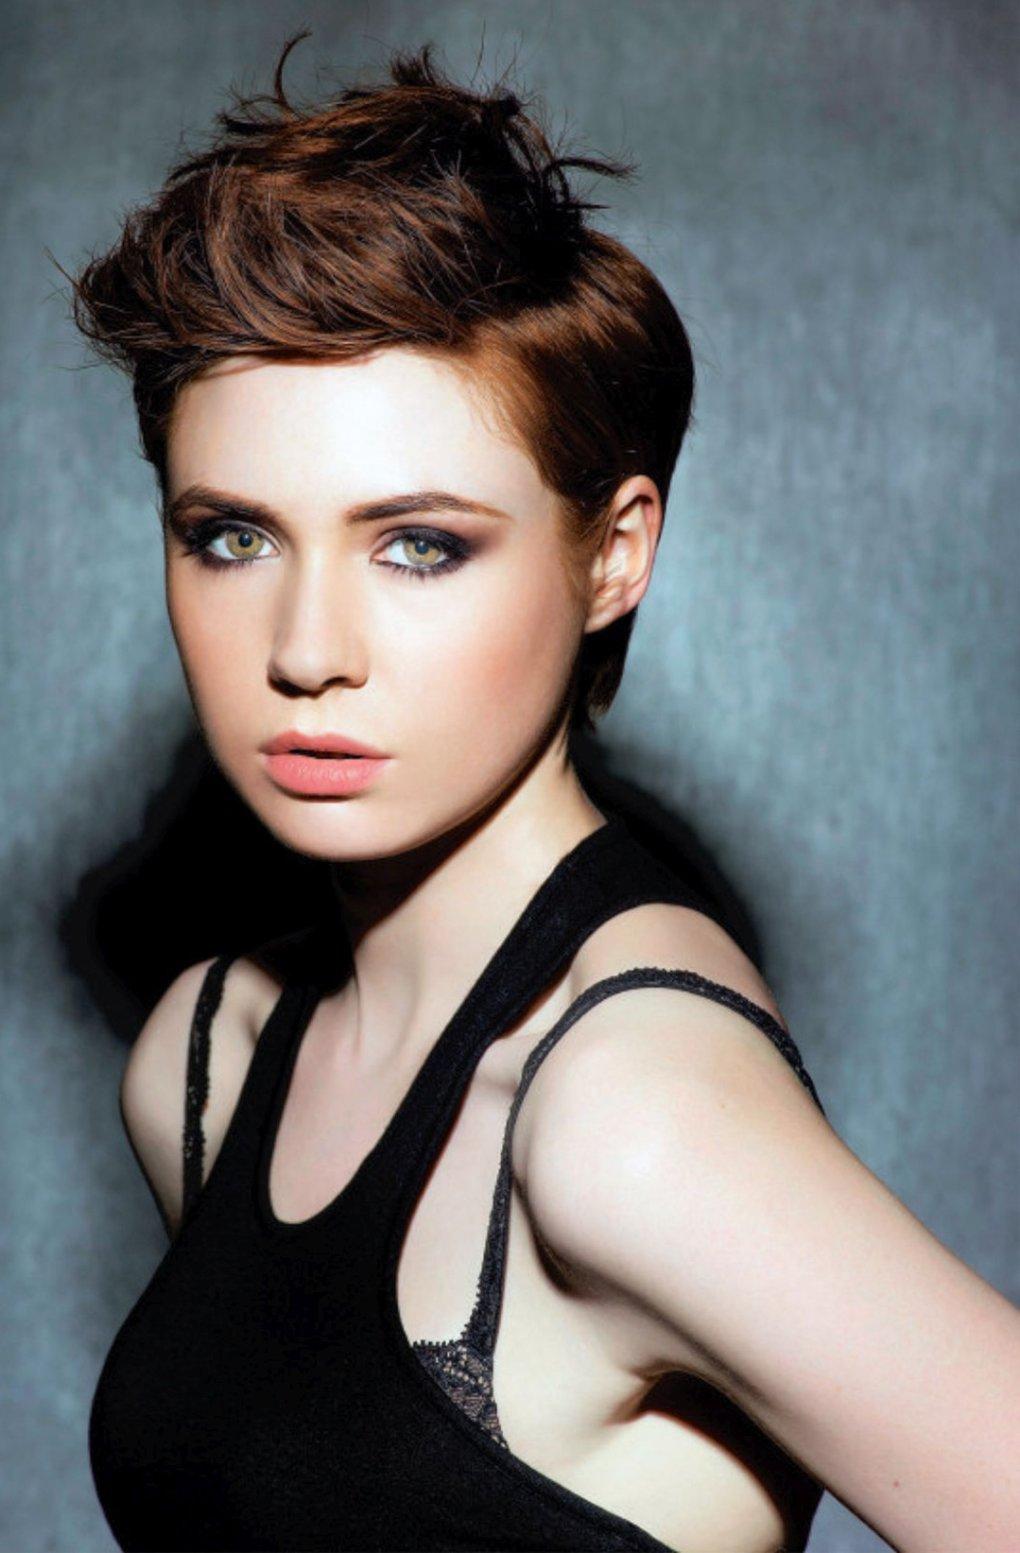 35 Hot Pictures Of Karen Gillan, Nebula From Marvel Cinematic Universe Along WIth Interesting Facts | Best Of Comic Books